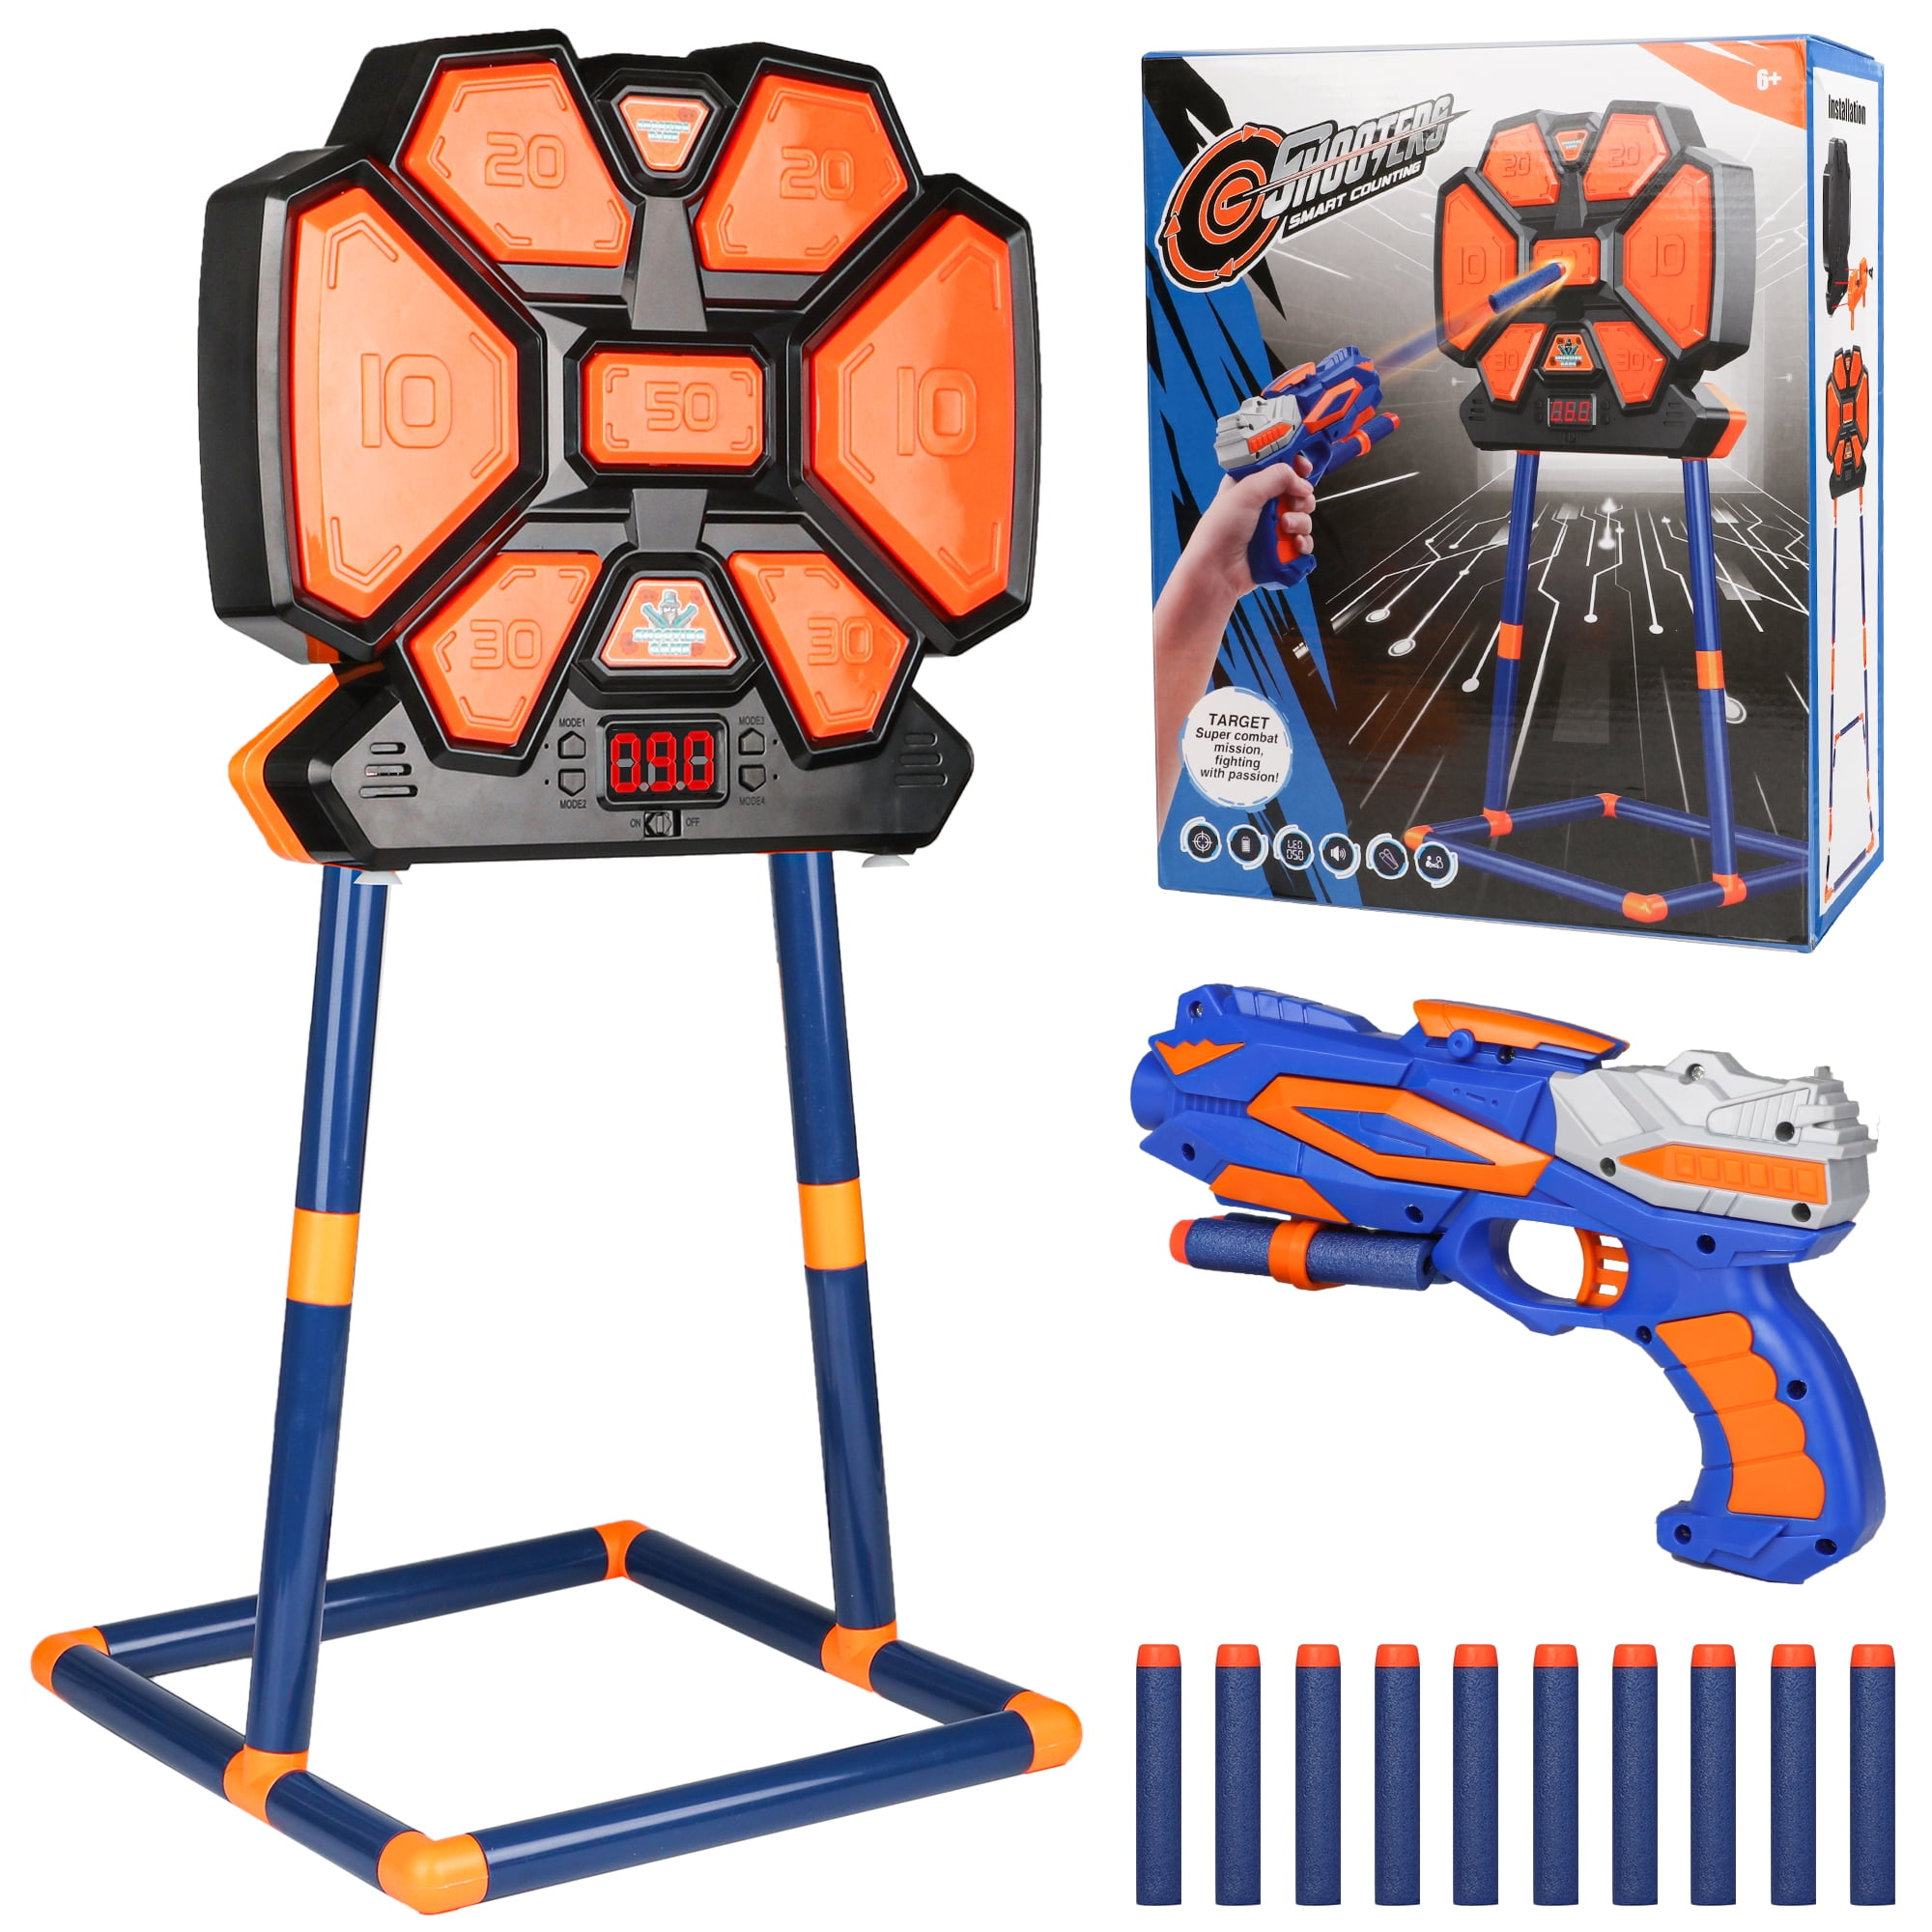 Beefunni Electronic Shooting Target for Kids, Interactive Game with Light and Sound, Ideal for Indoor and Outdoor Play, Improve Shooting Skills and Eye-Hand Coordination